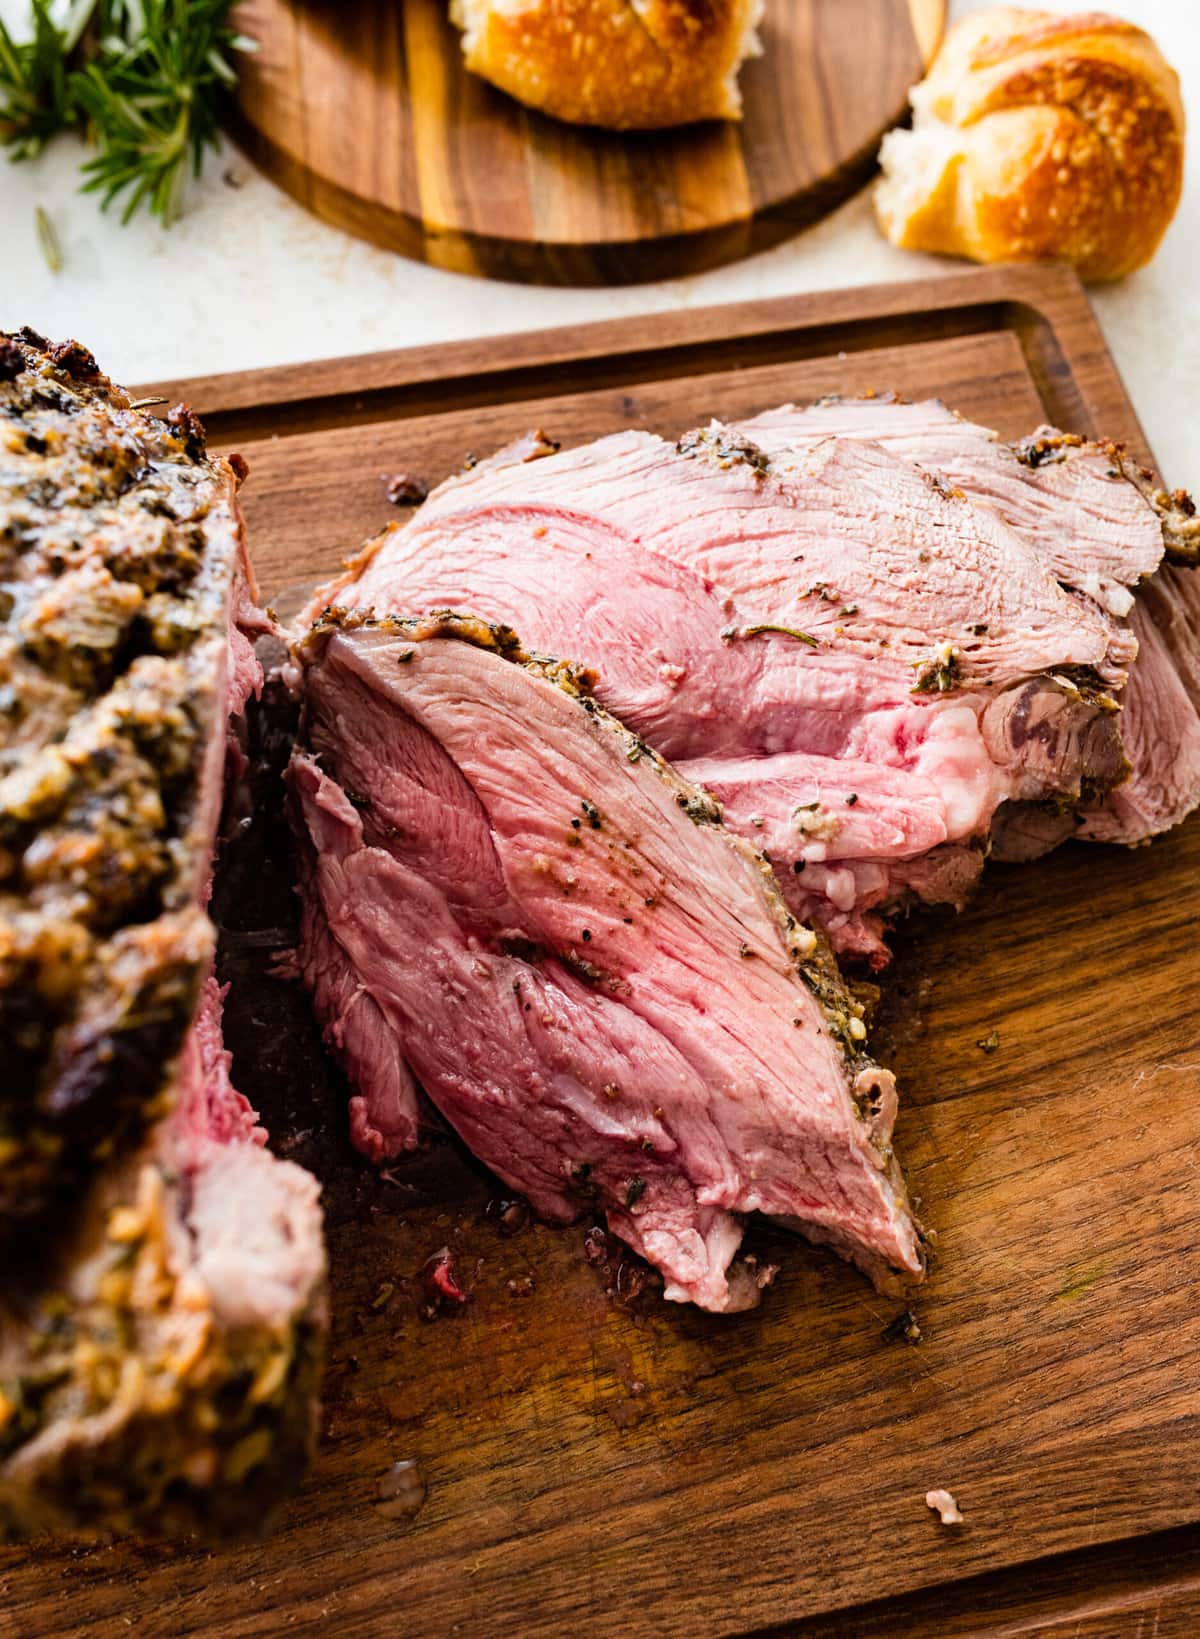 pieces of cut meat on a cutting board. The perfect roast leg of lamb is roasted to perfection.